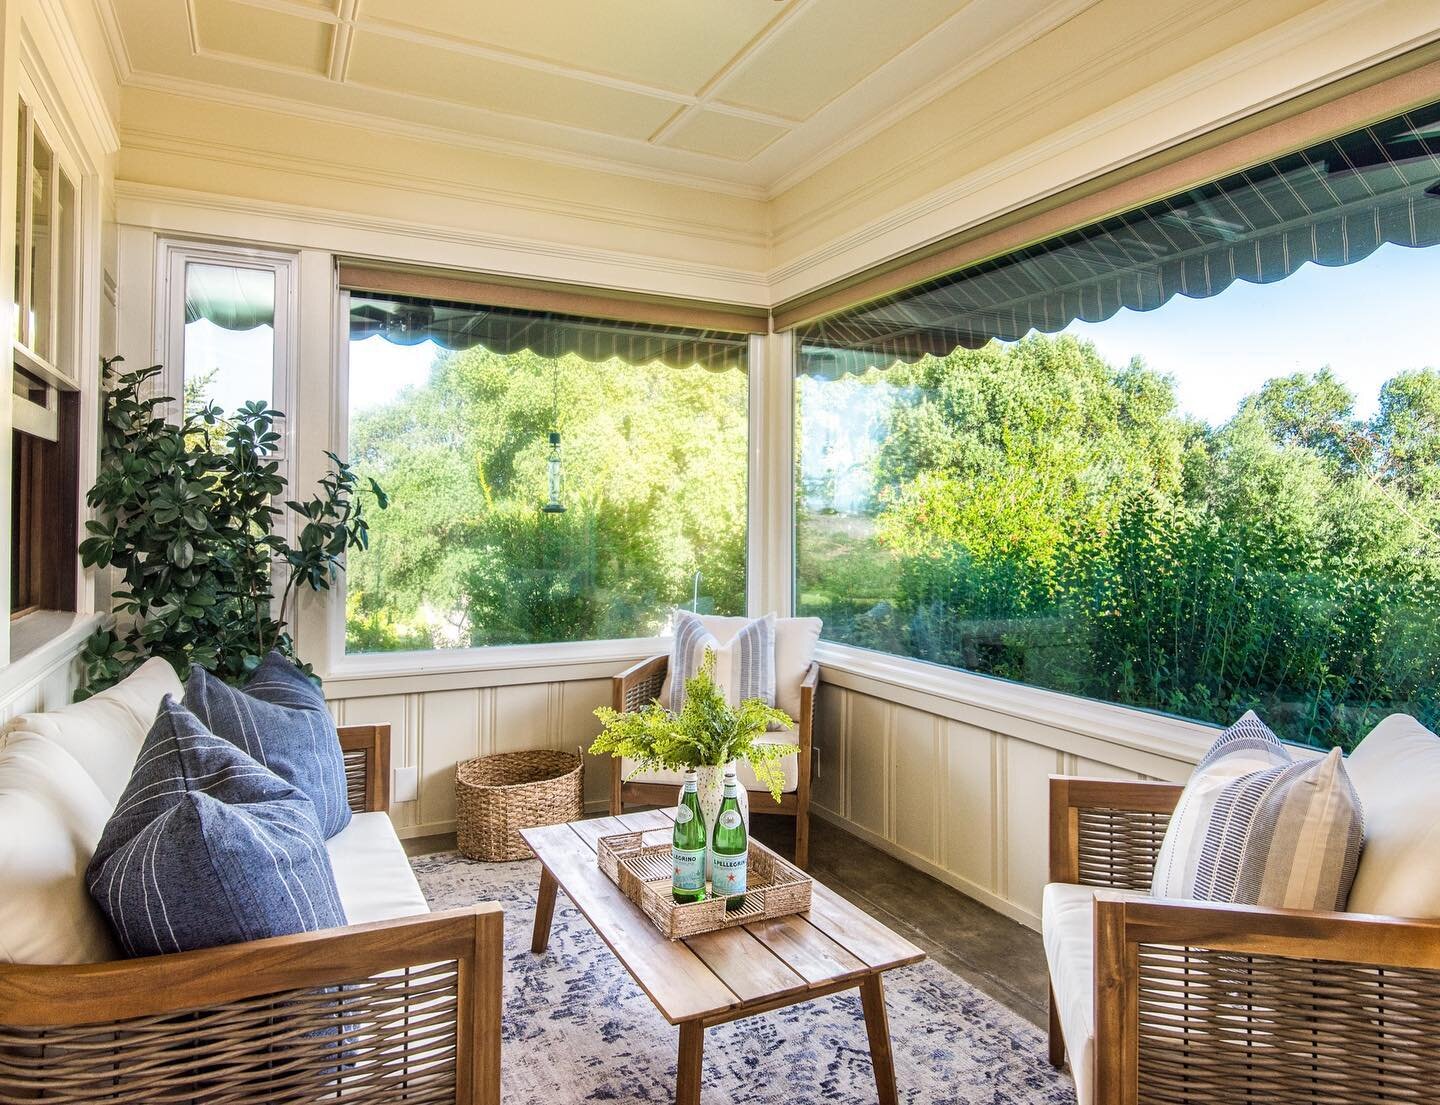 The only thing missing from these photos is a huge jug of fresh lemonade and a bottle of vino! Tag someone who you'd want to join you for a lounge here!

The Farmhouse's enclosed porch is a dream morning-to-night. We love to either cozy up from the c